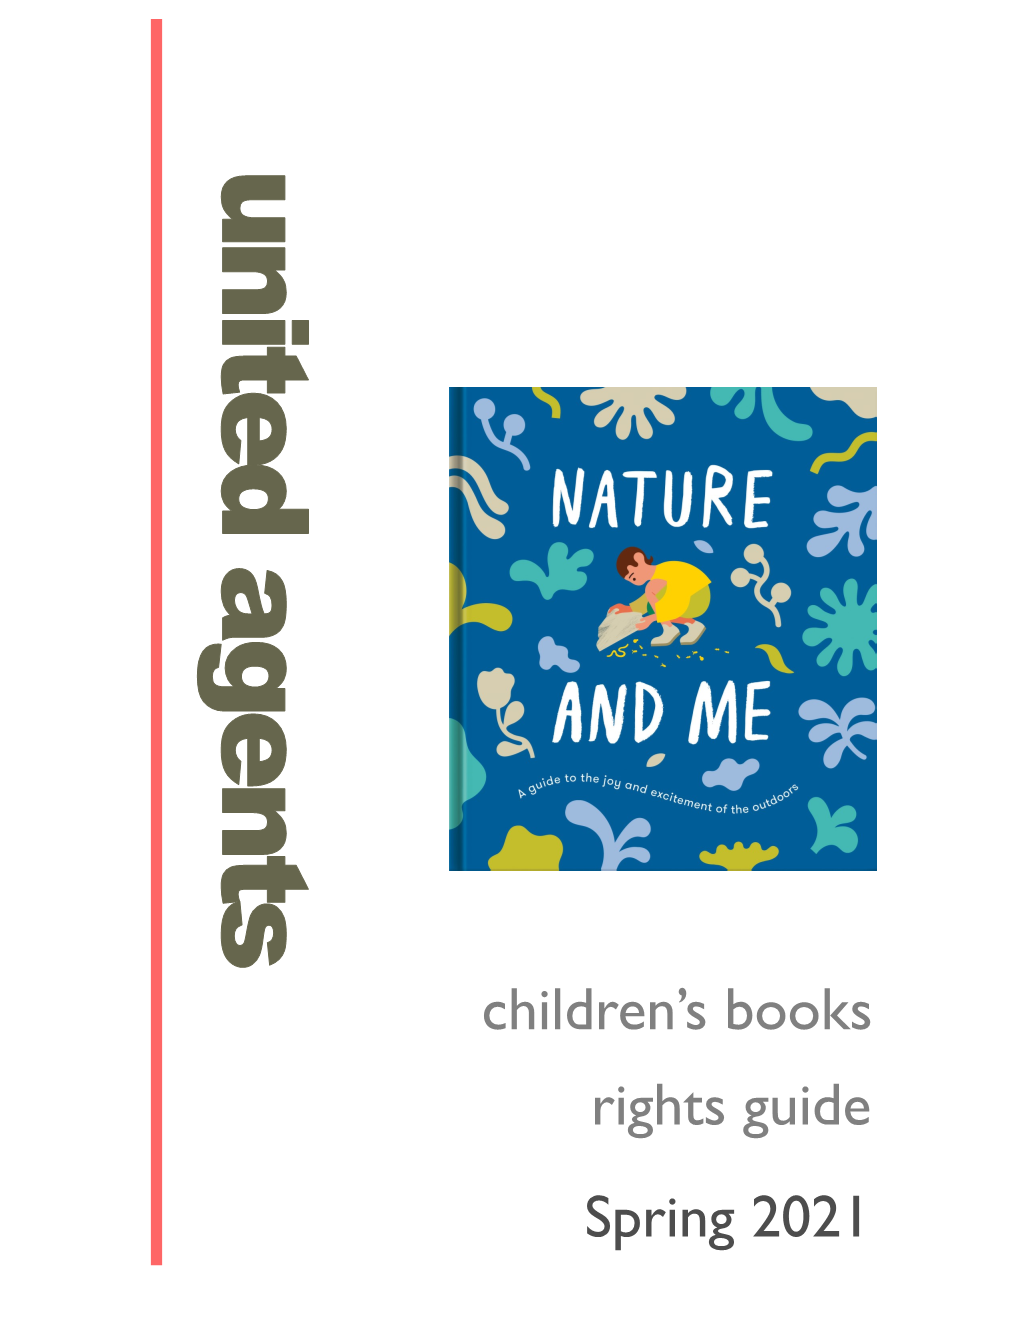 Children's Books Rights Guide Spring 2021